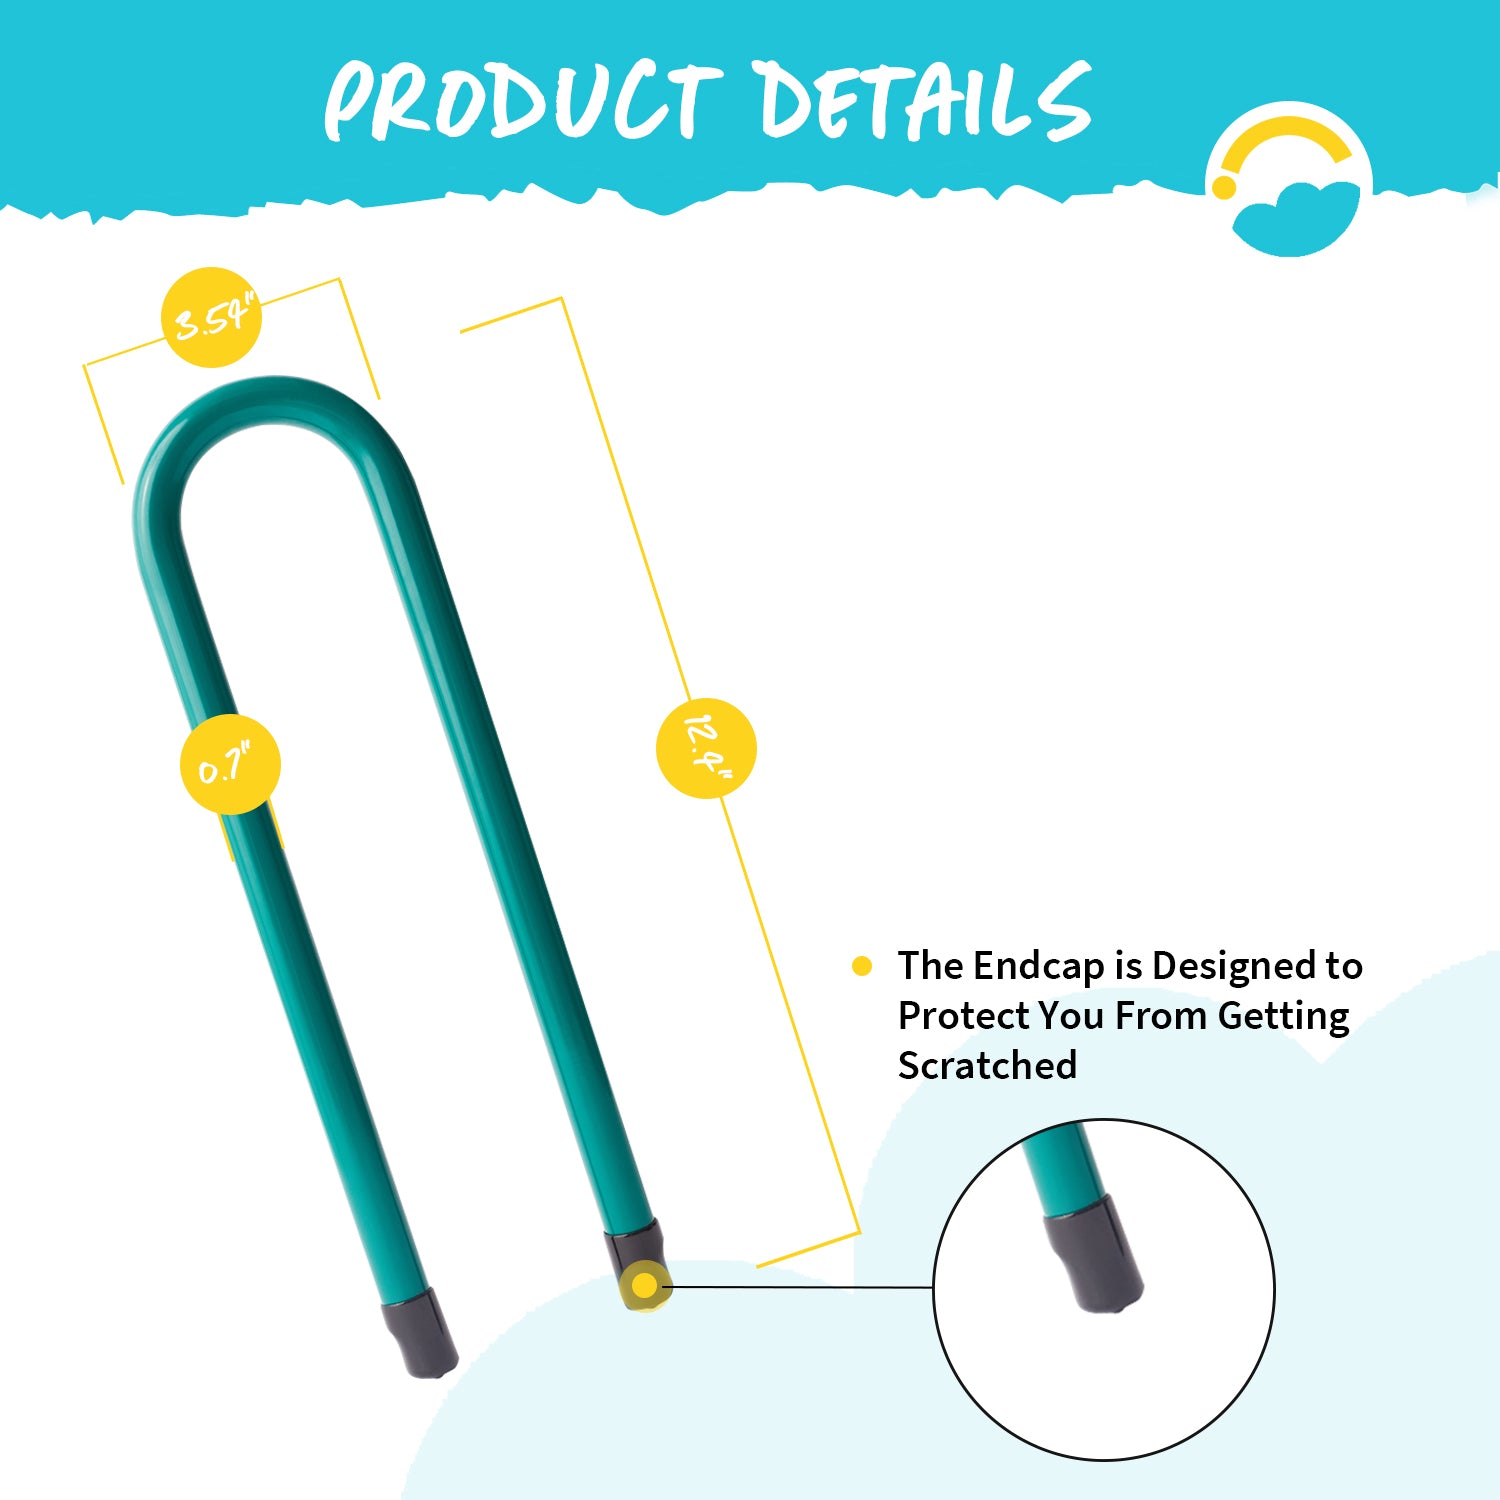 Product Details: Height of U-Shaped Anchor 12.4", Length is 3.54", Thickness of U-Shape Anchor Kit is 0.7". The Endcap is Designed to Protect You From Getting Scratched.